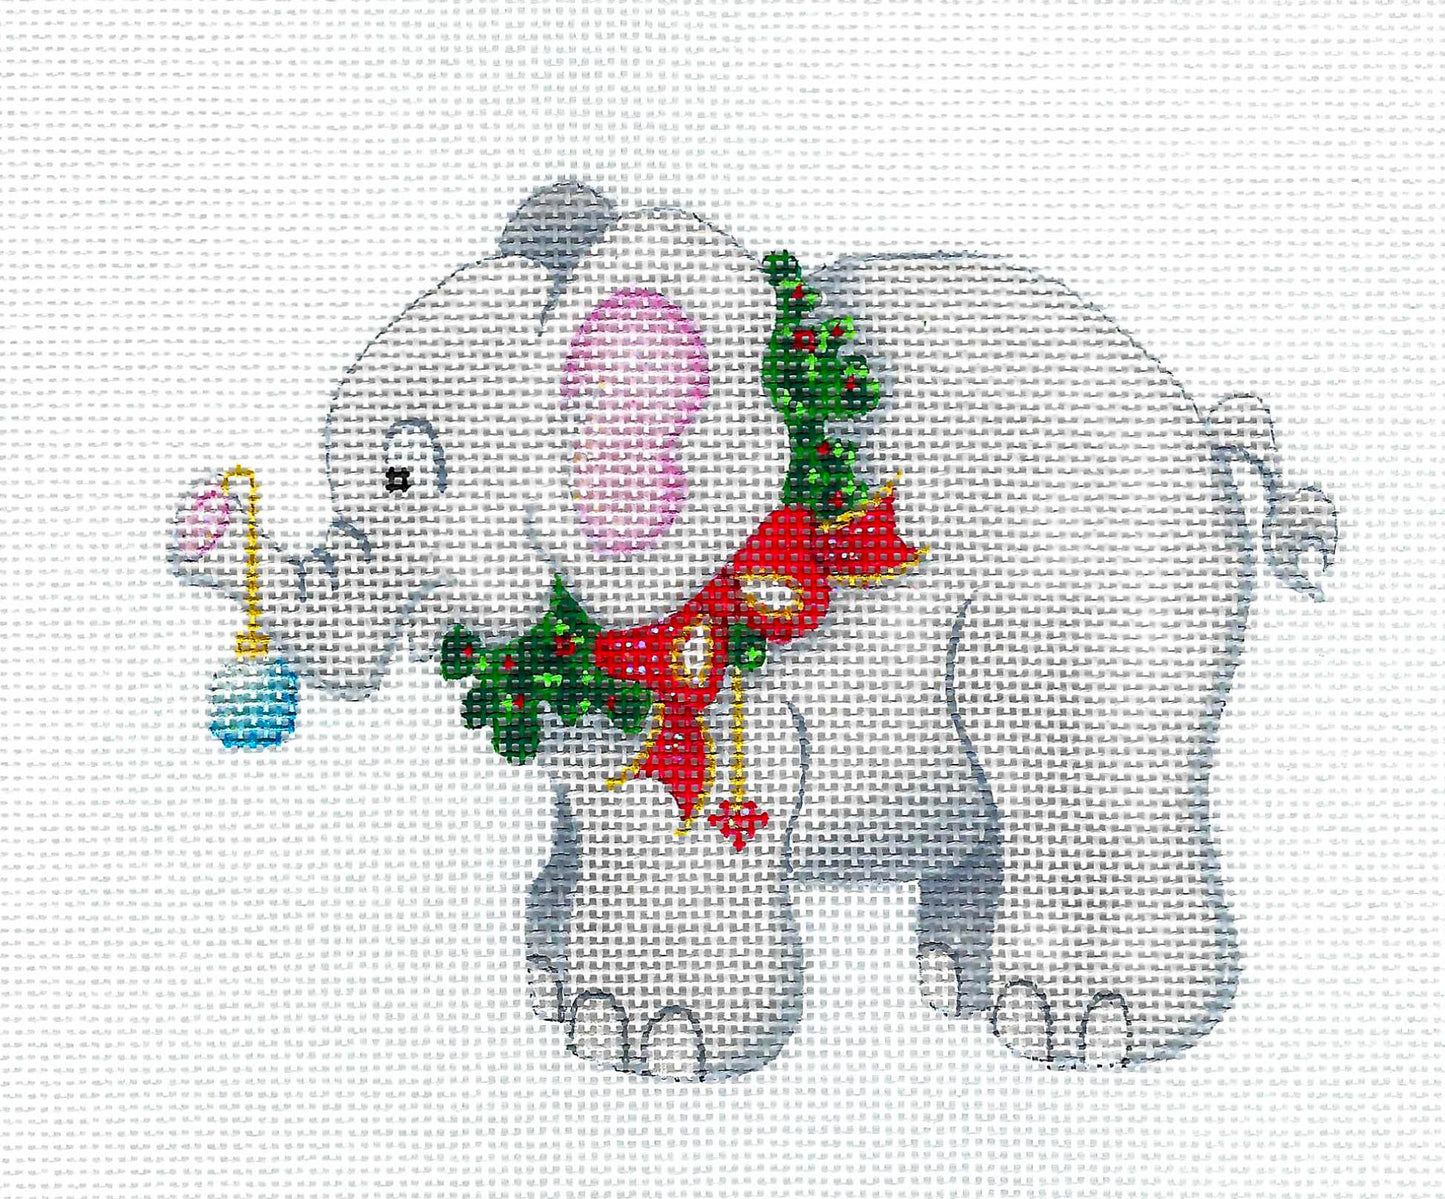 Christmas Elephant with Ornament and Holly Wreath handpainted Needlepoint Canvas by Strictly Christmas